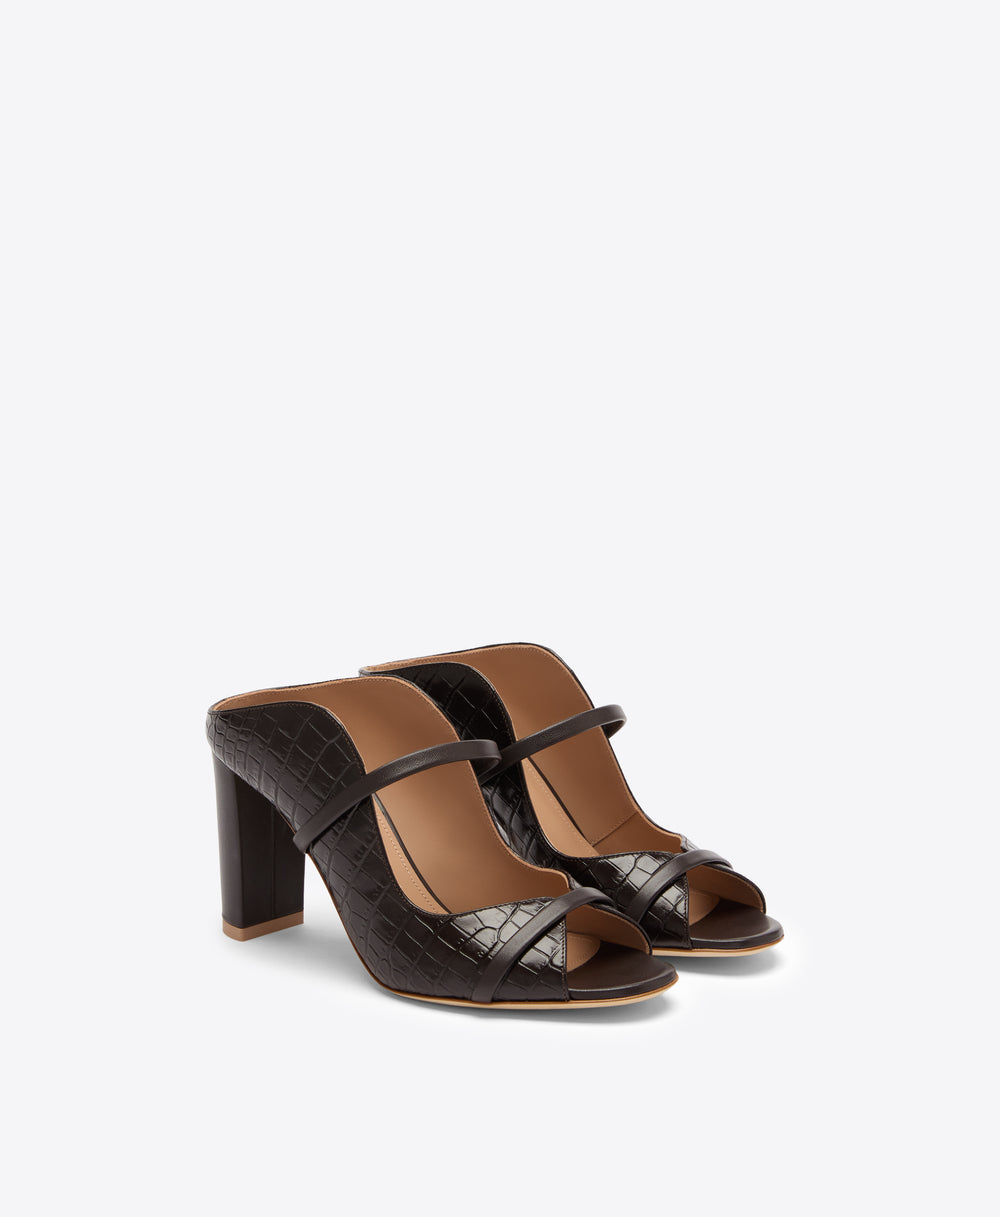 Norah 85 Dark Brown Croc Leather Sandals Malone Souliers